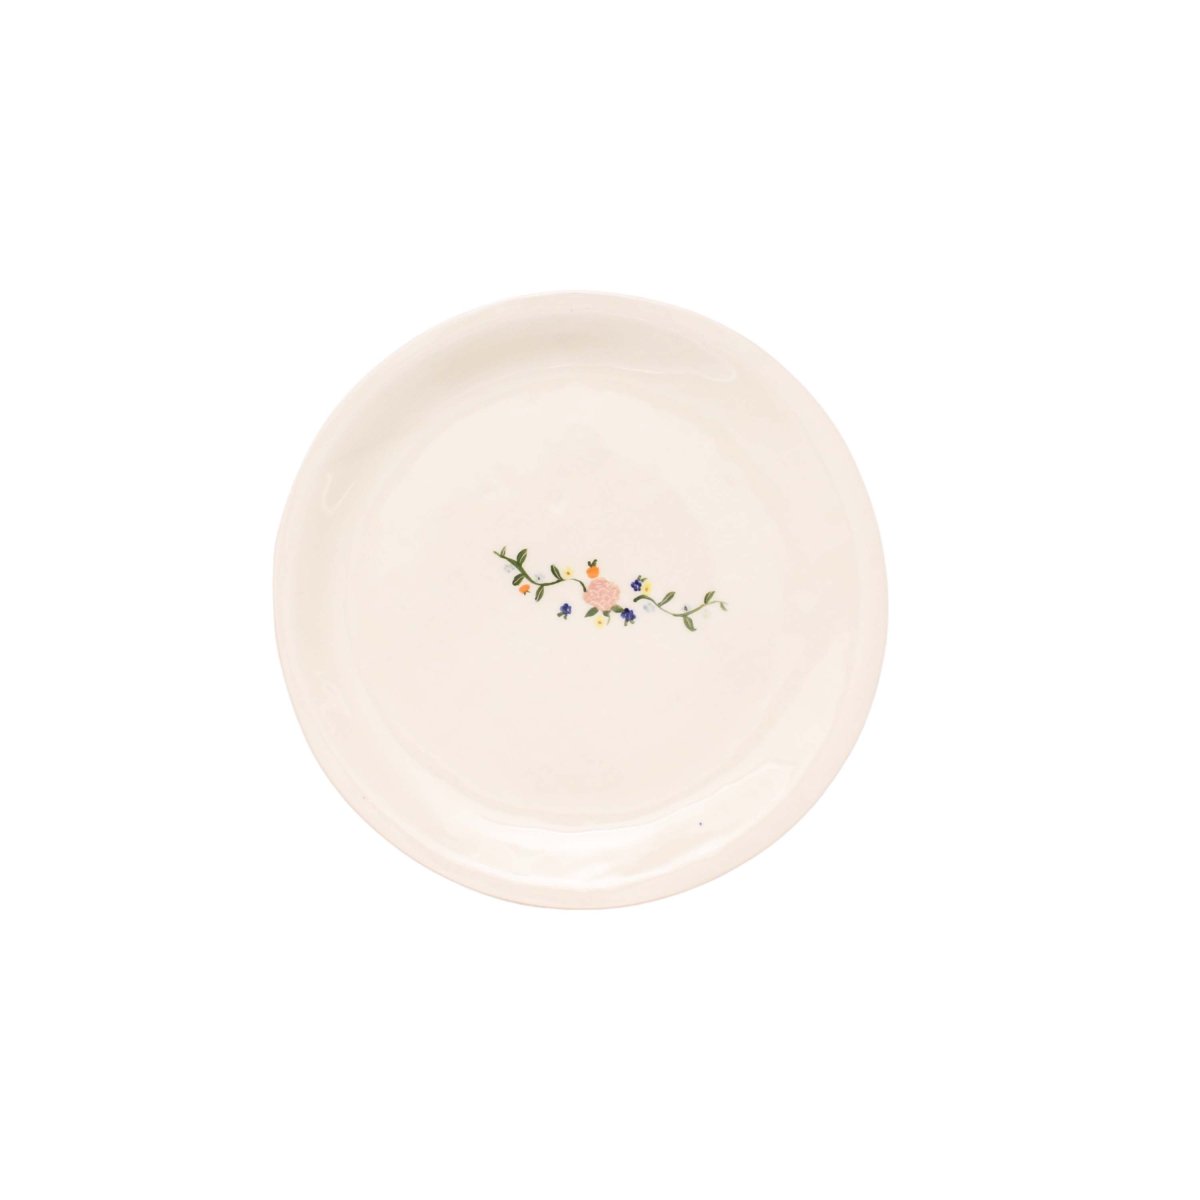 Large Dinner Plate Embroidery Motif【PINK】